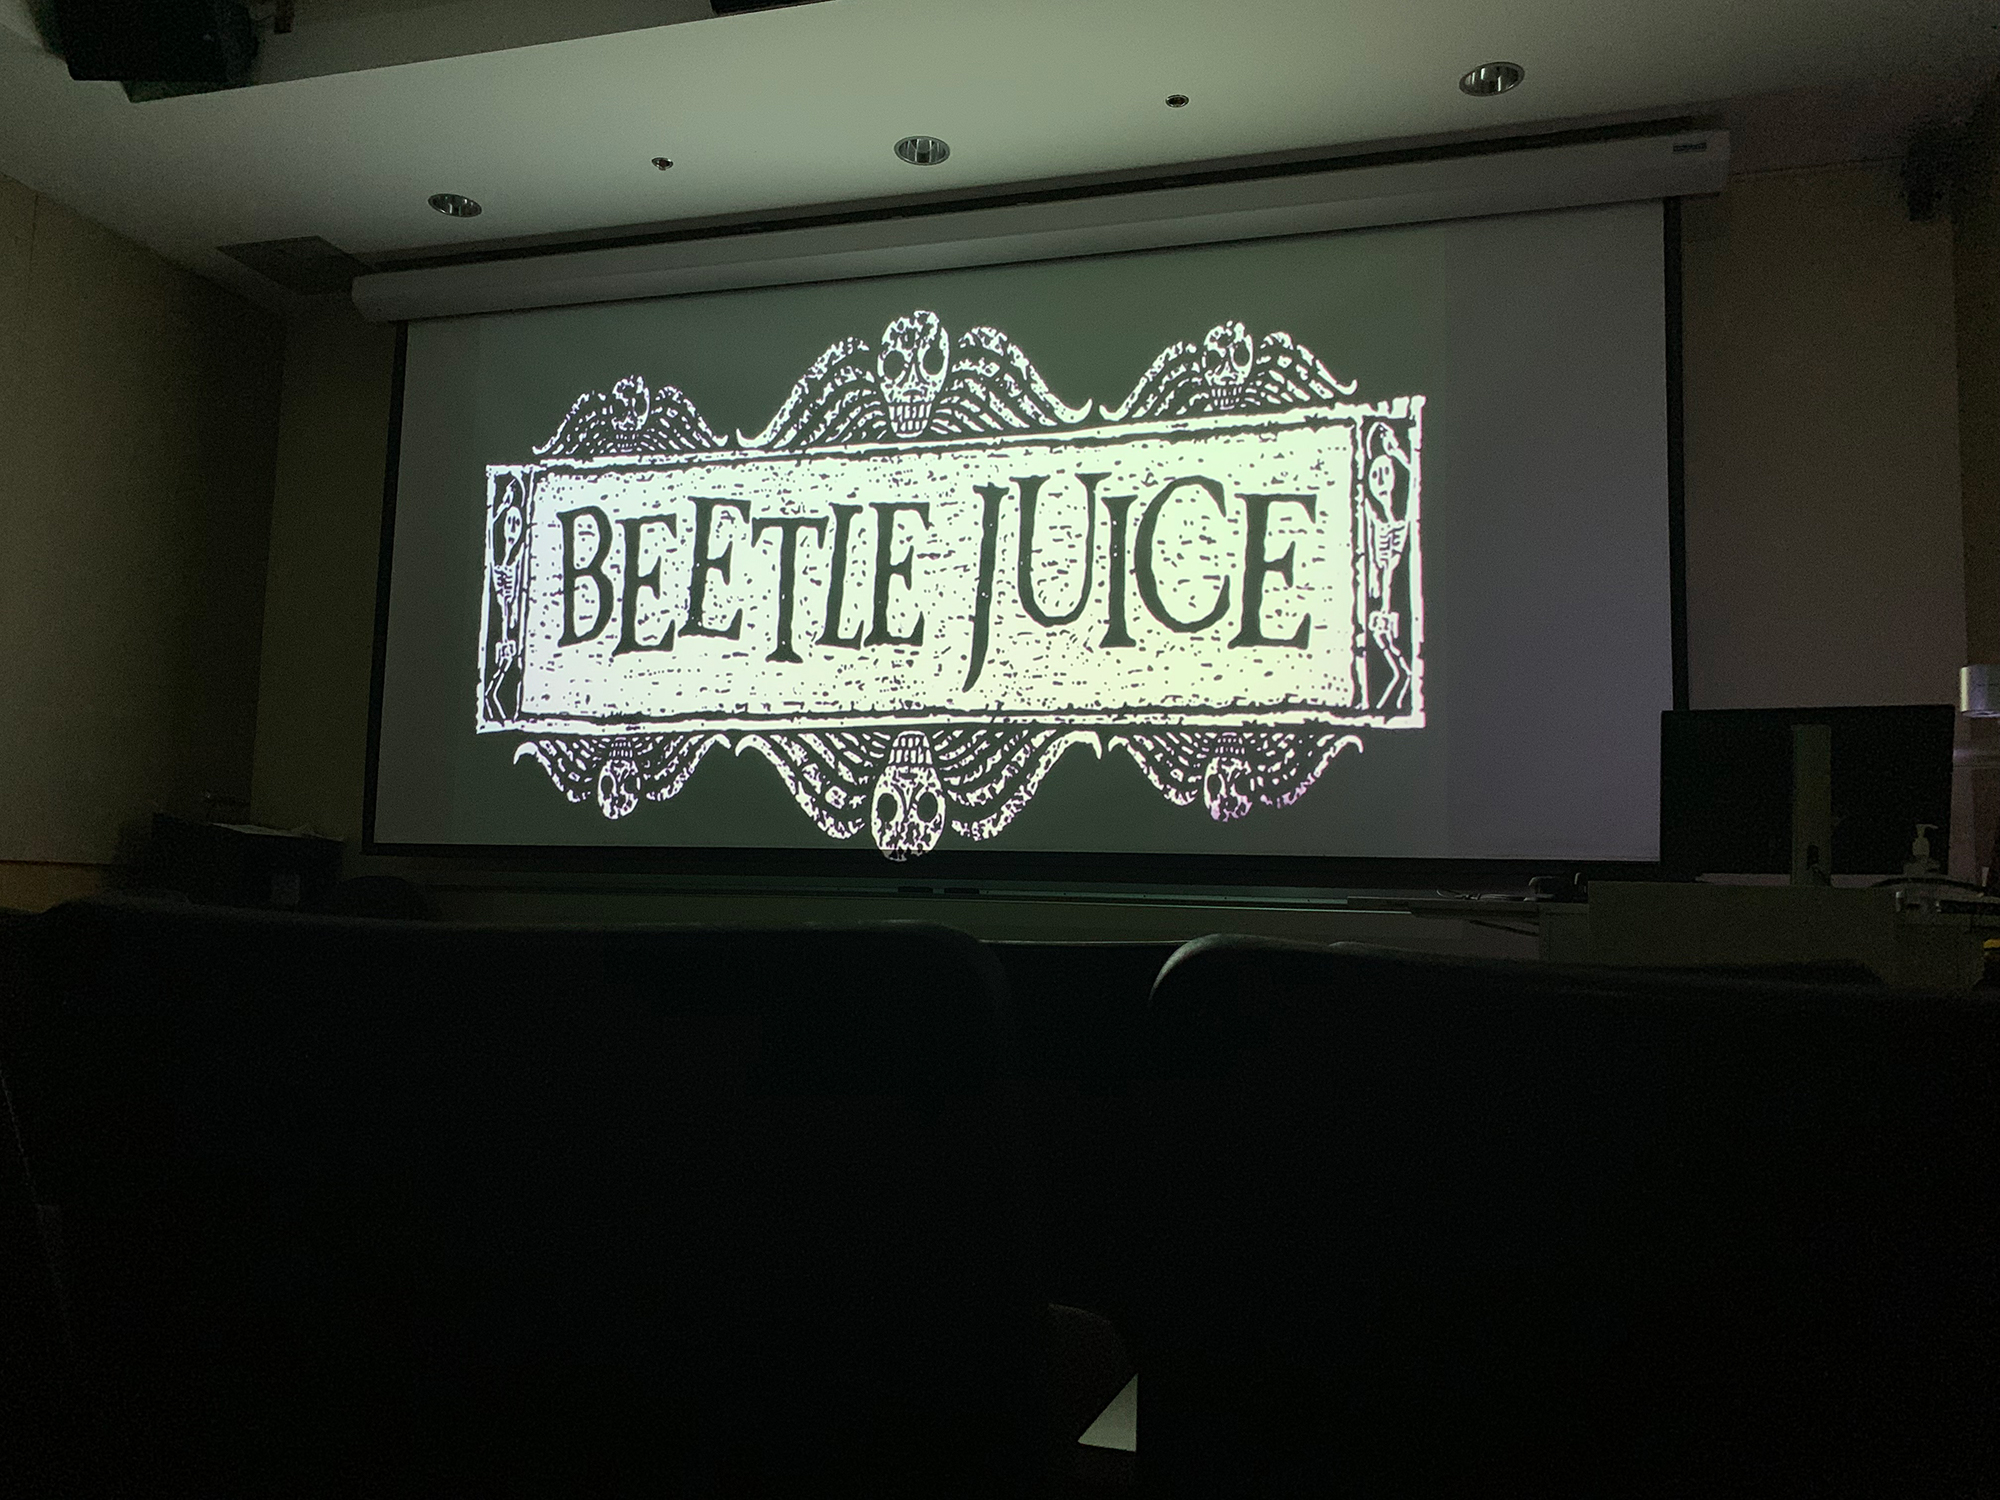 Image of the title card of “Beetlejuice” playing on a project in a Viking Union classroom.